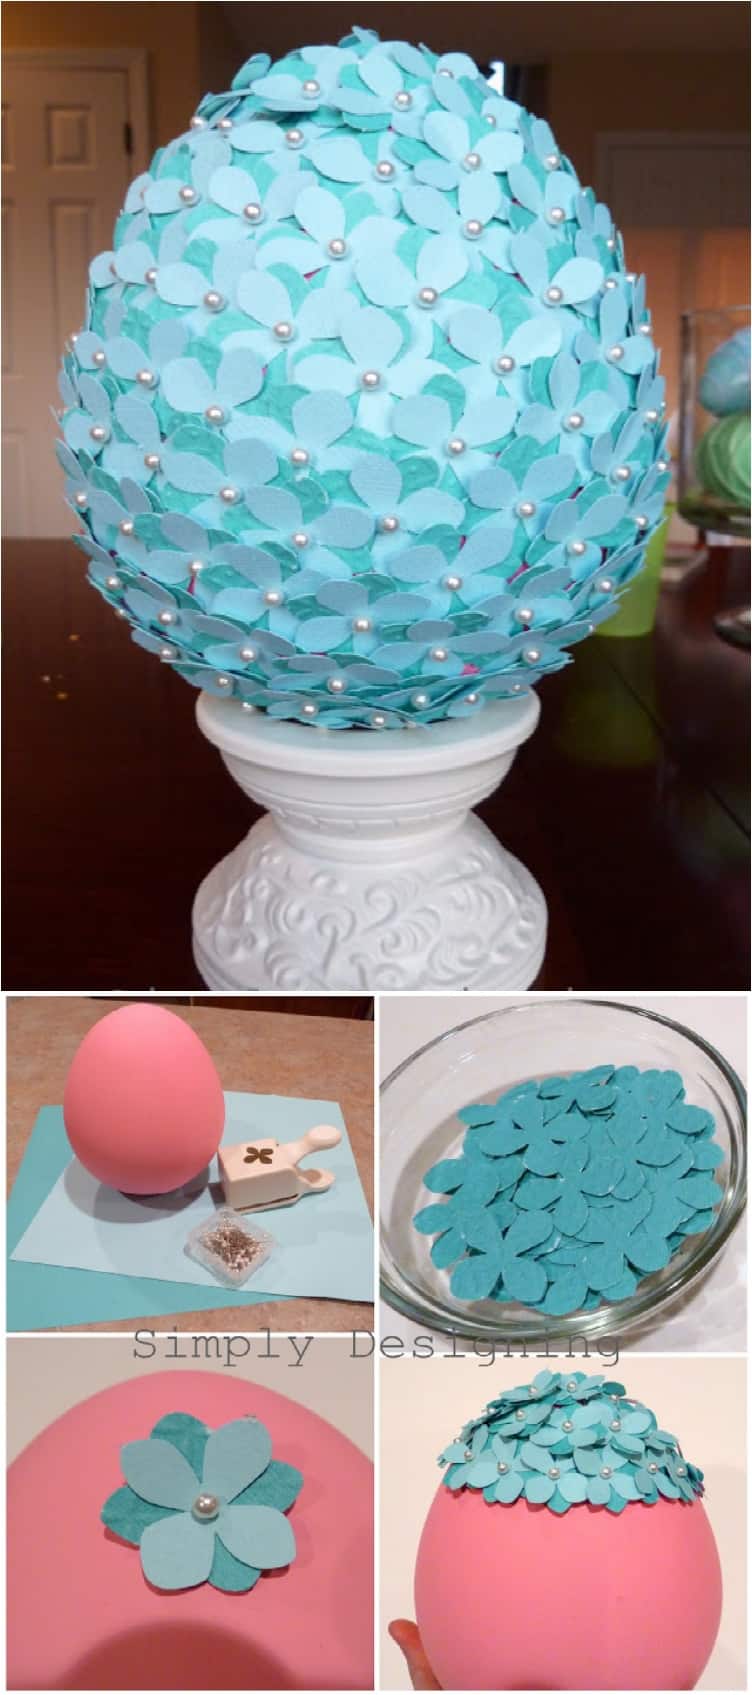 18 DIY Easter Centerpieces to Adorn Your Table